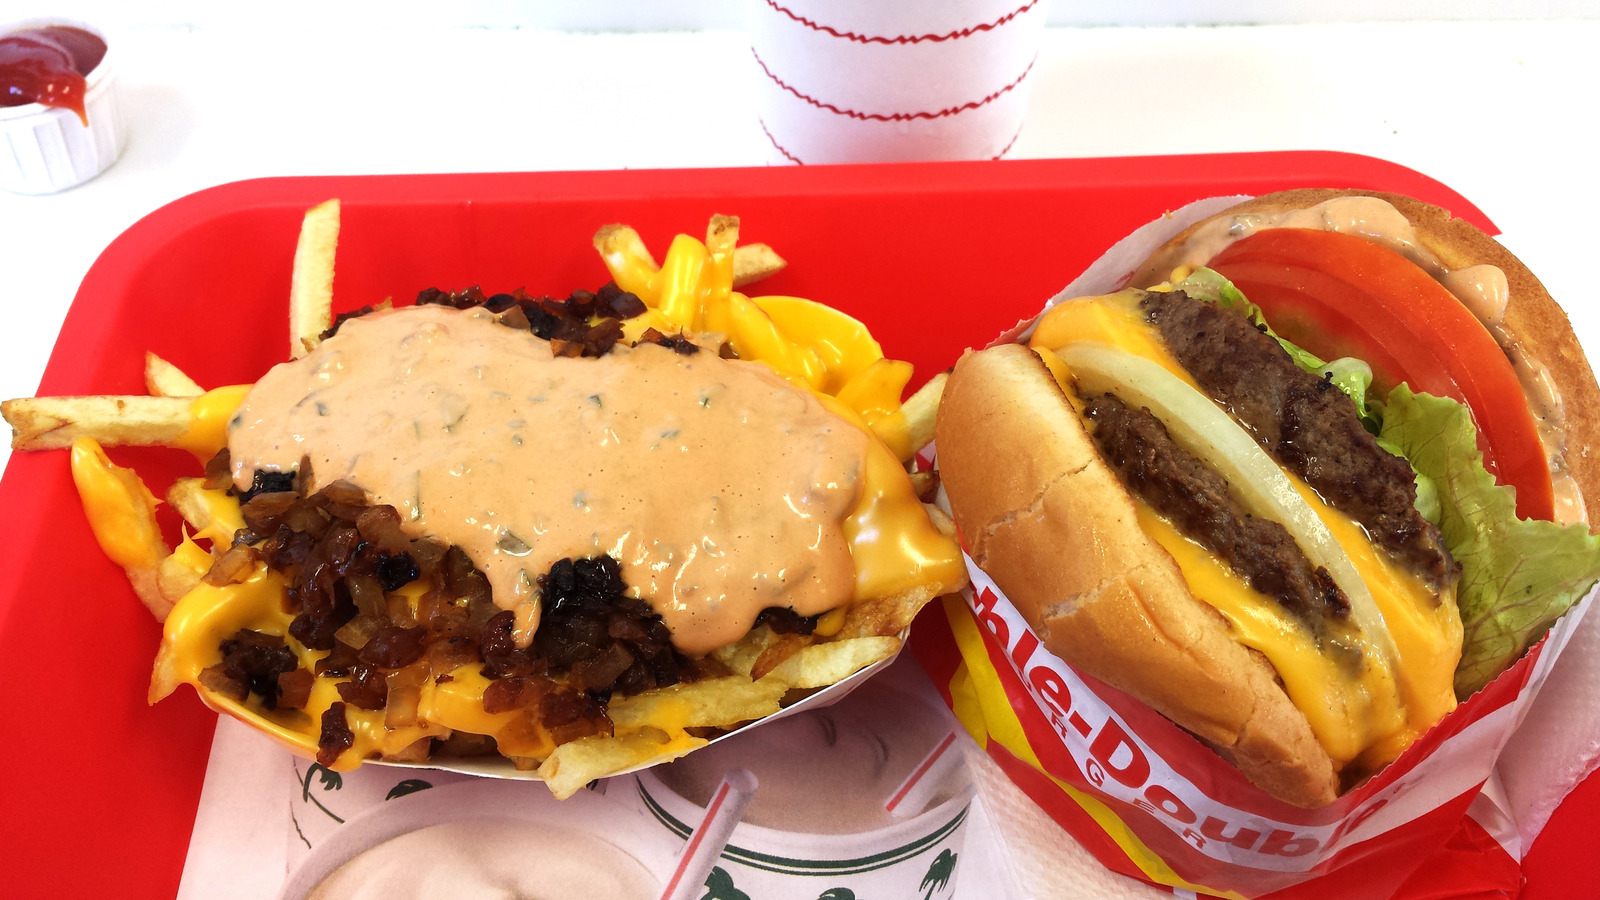 The Troubling Reason Behind In-N-Out's First-Ever Store Closure